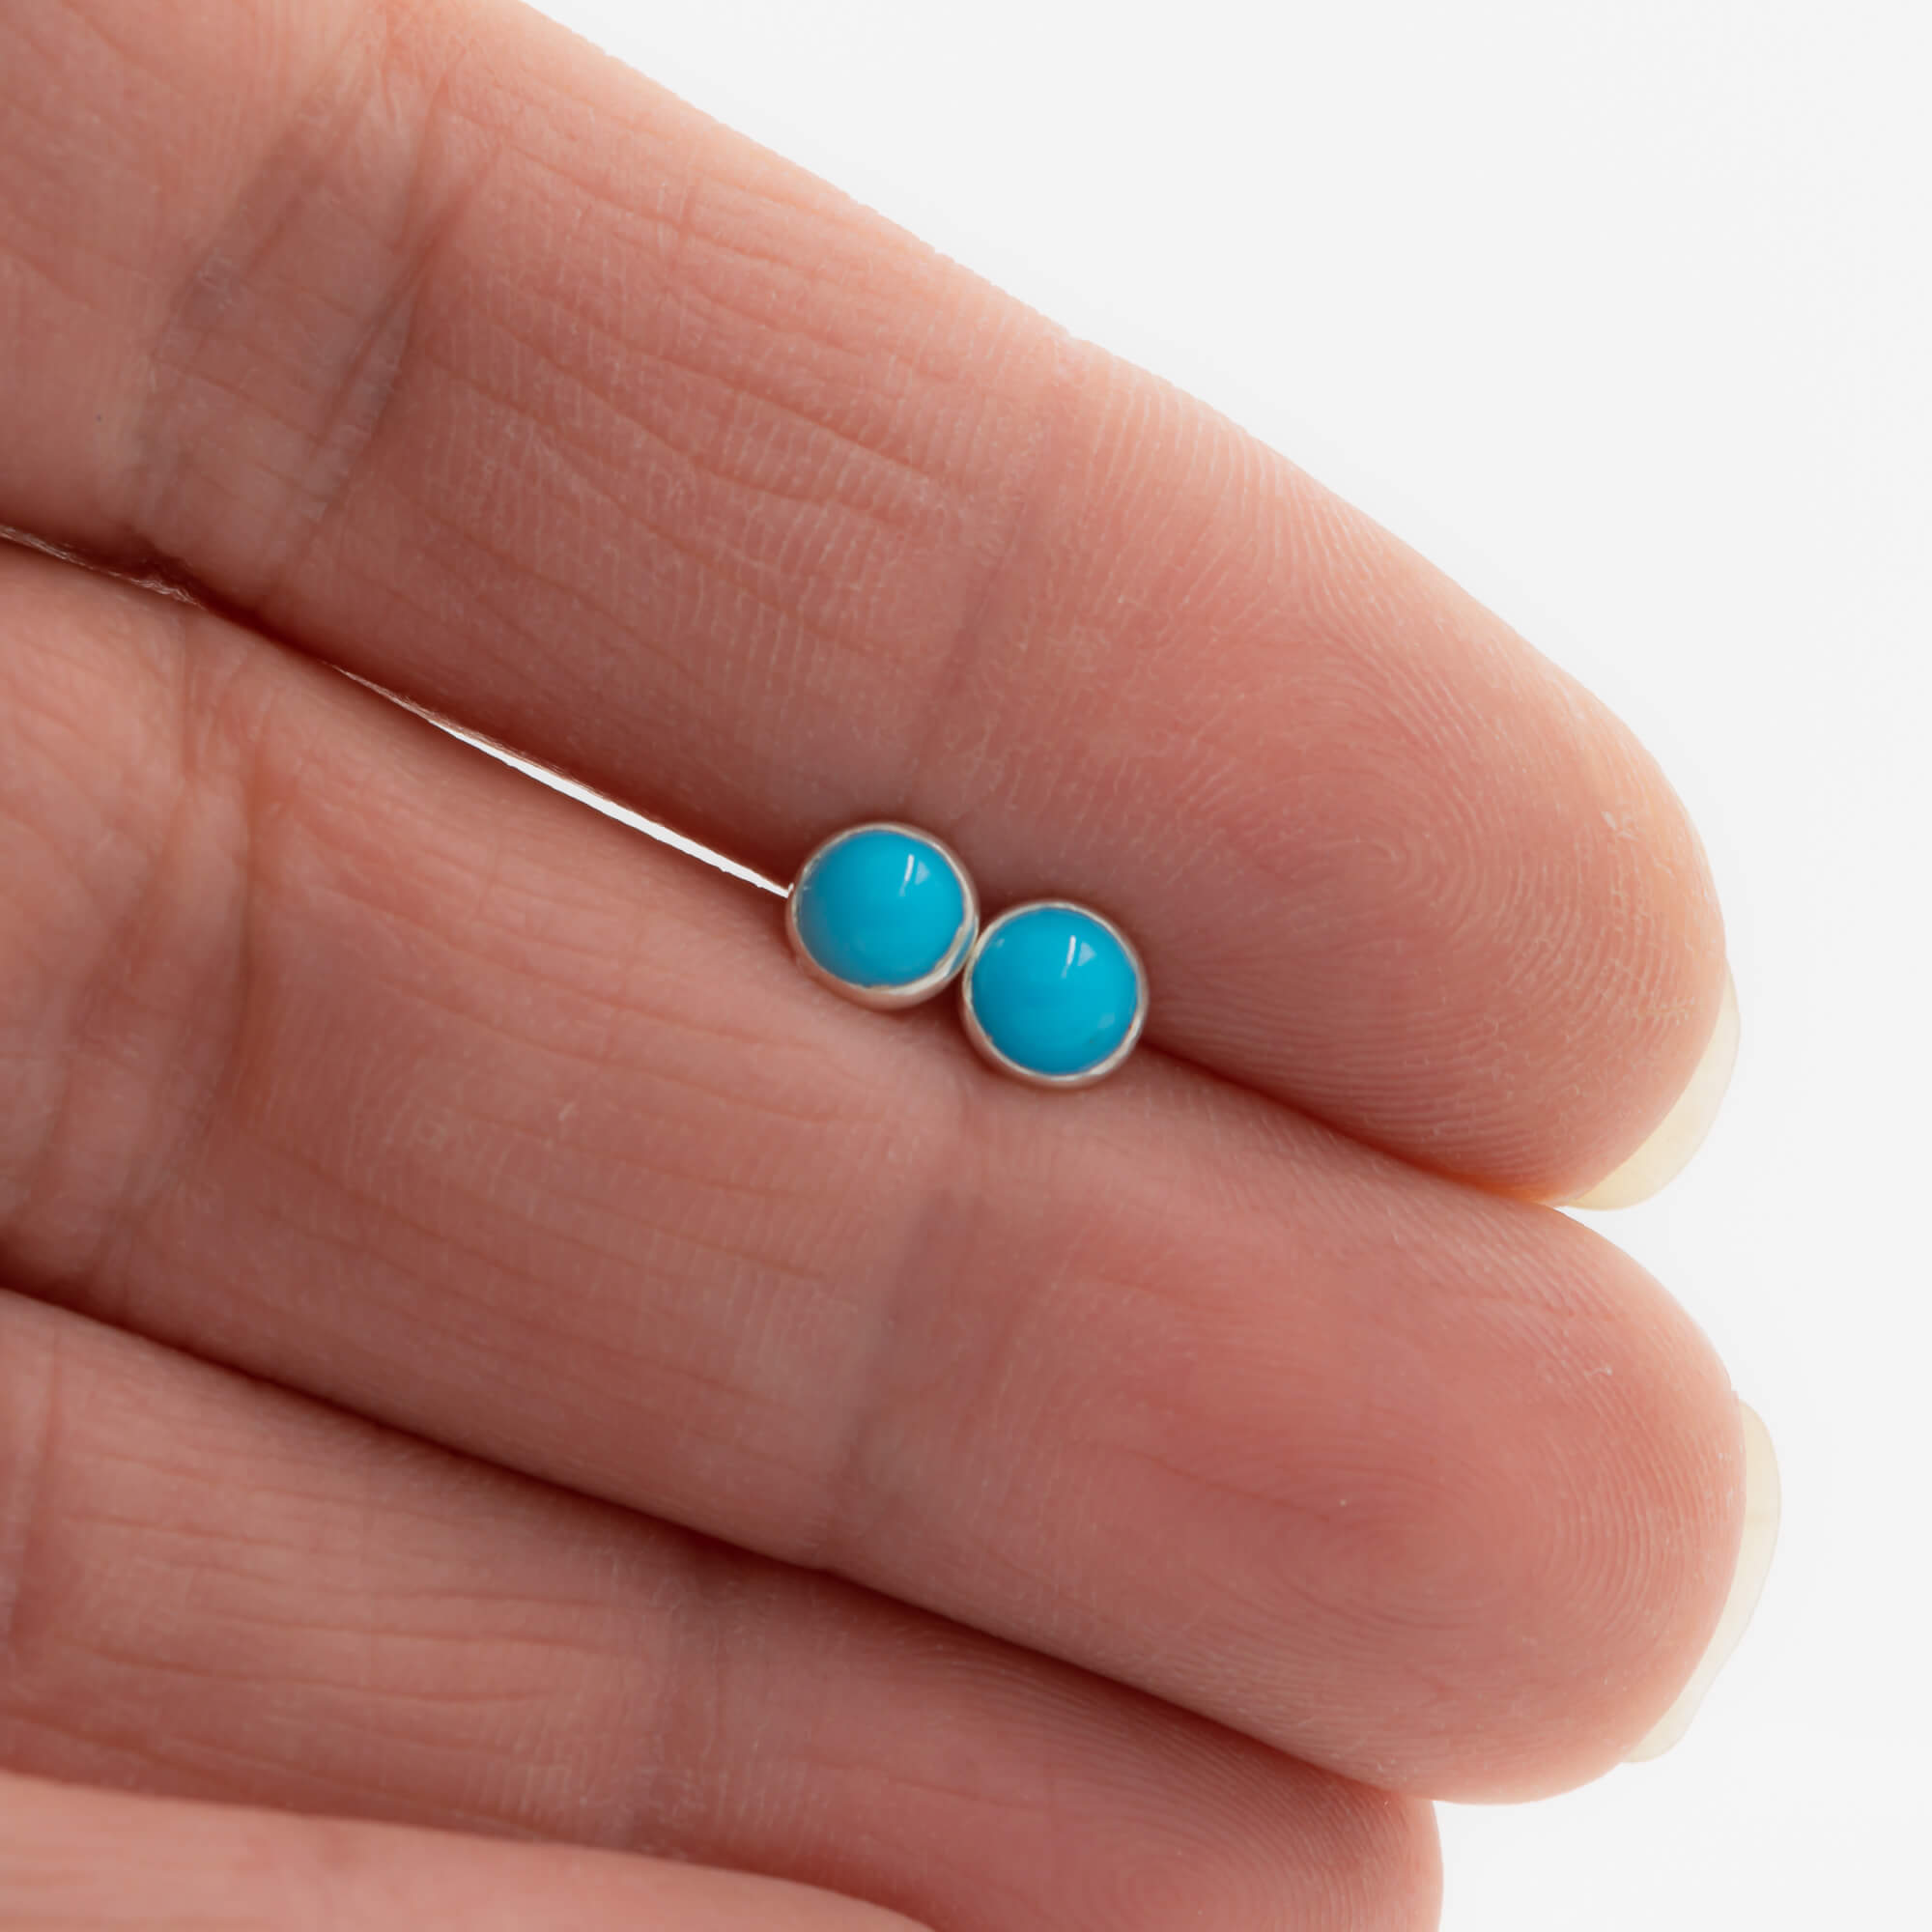 5mm sleeping beauty turquoise stud earrings in sterling silver shown for scale